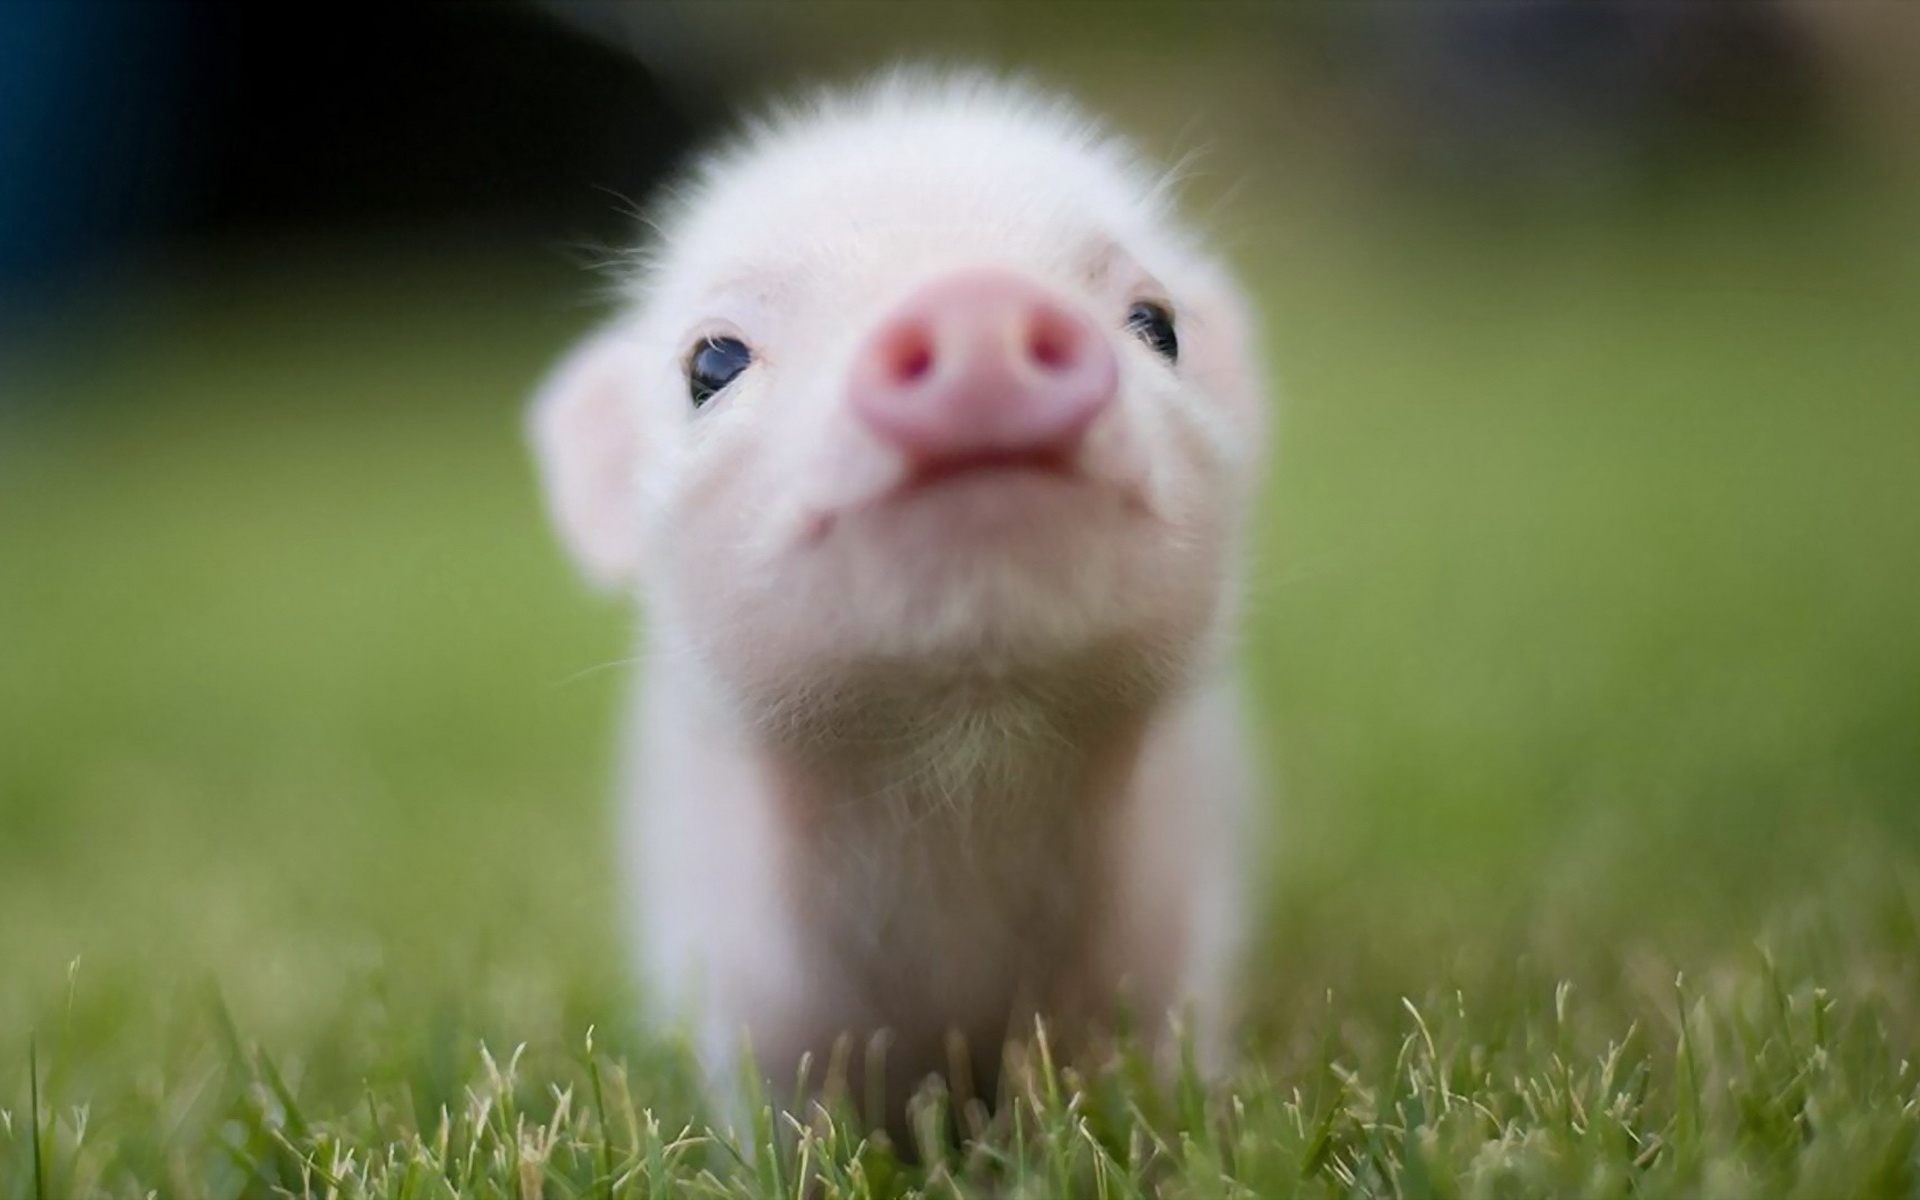 Little pig wallpapers and images   wallpapers pictures photos